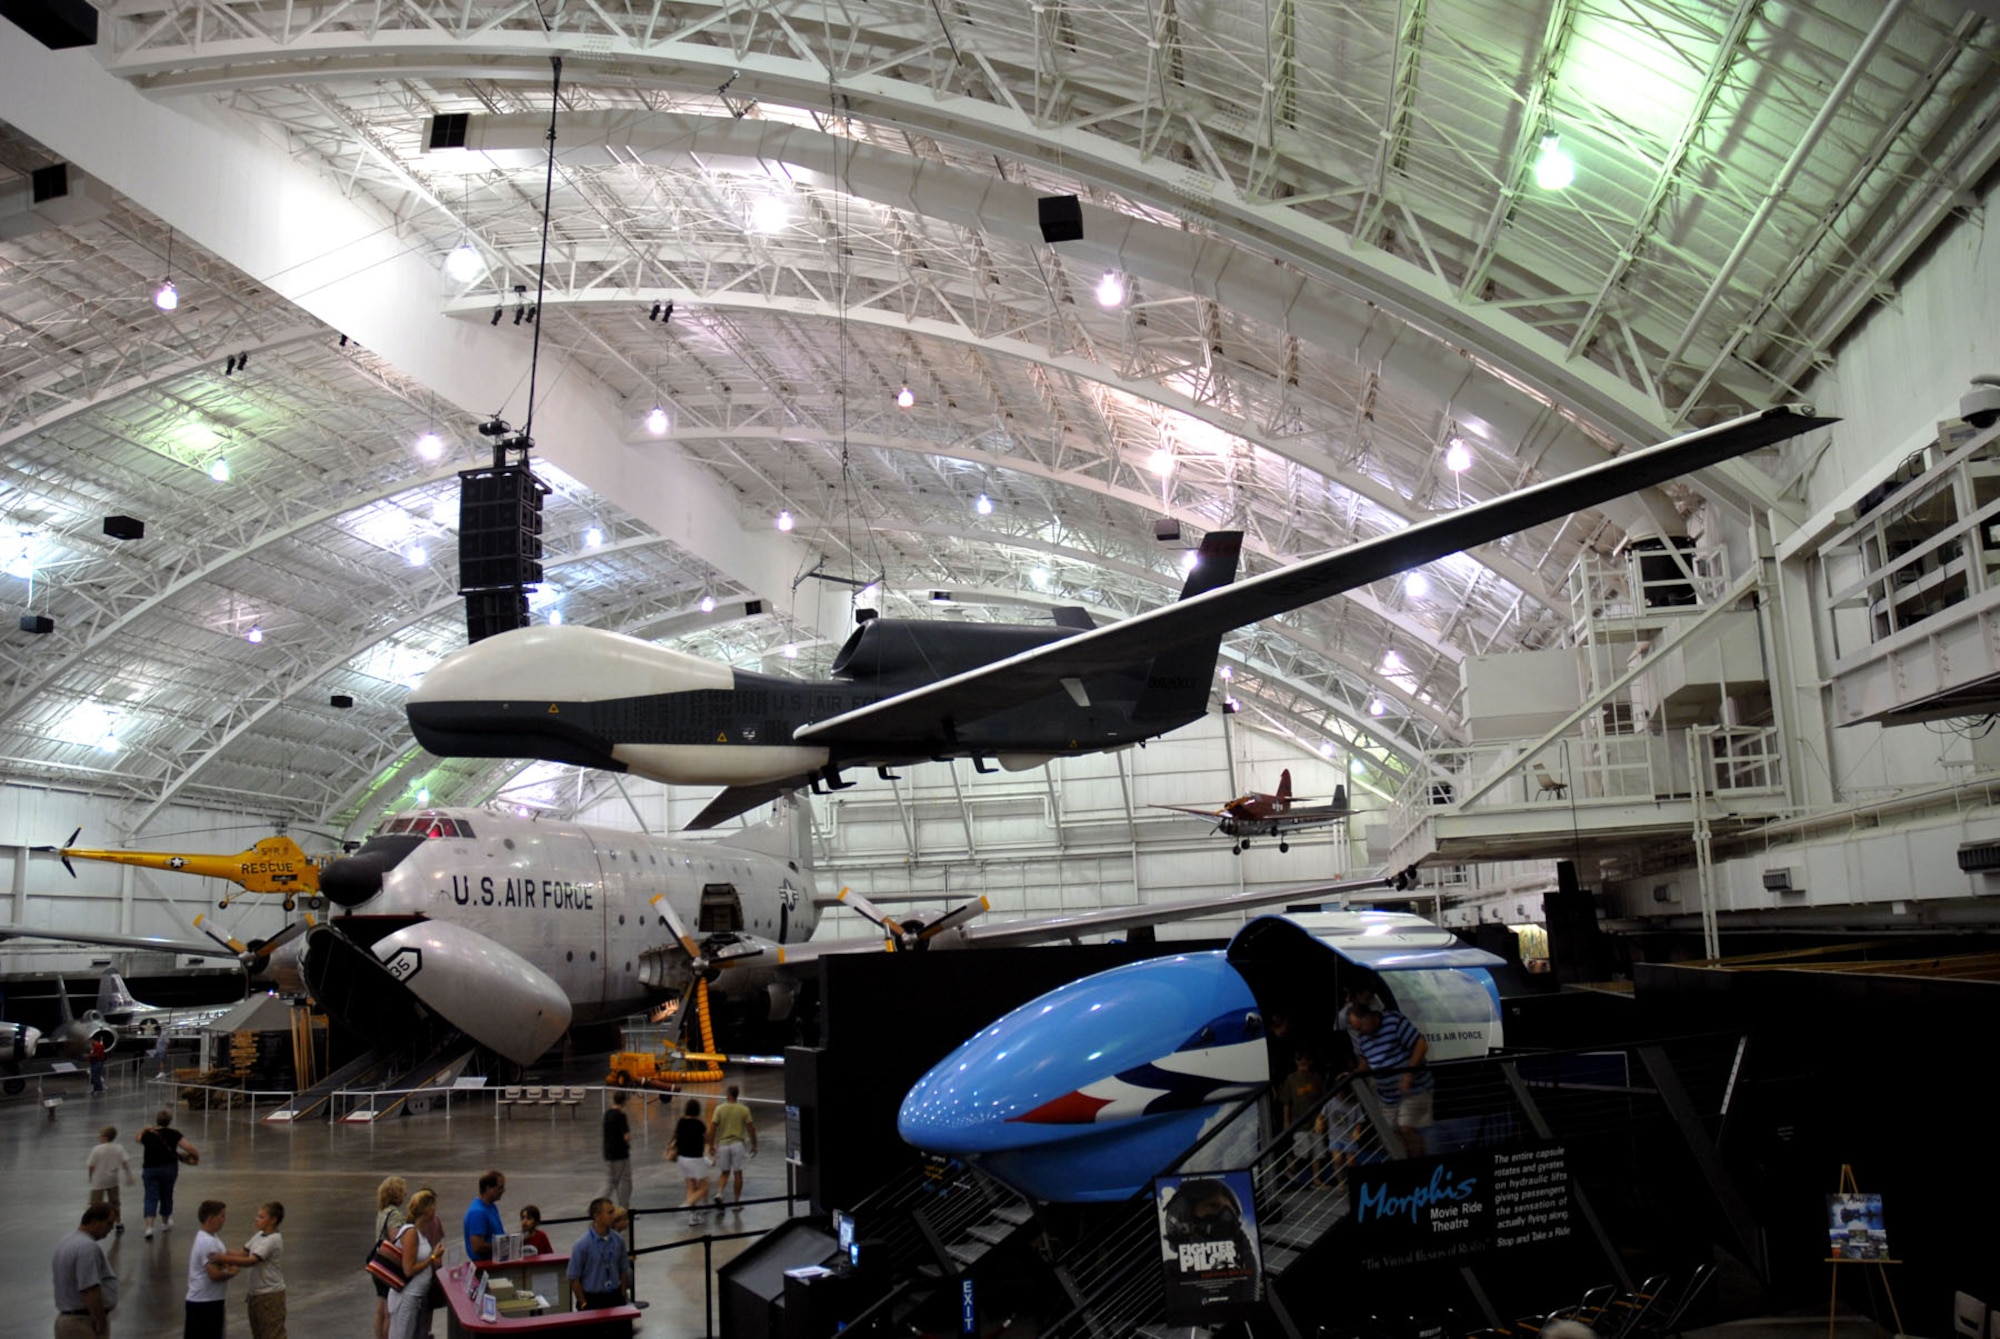 DAYTON, Ohio -- Northrop Grumman RQ-4 Global Hawk at the National Museum of the United States Air Force. (U.S. Air Force photo)